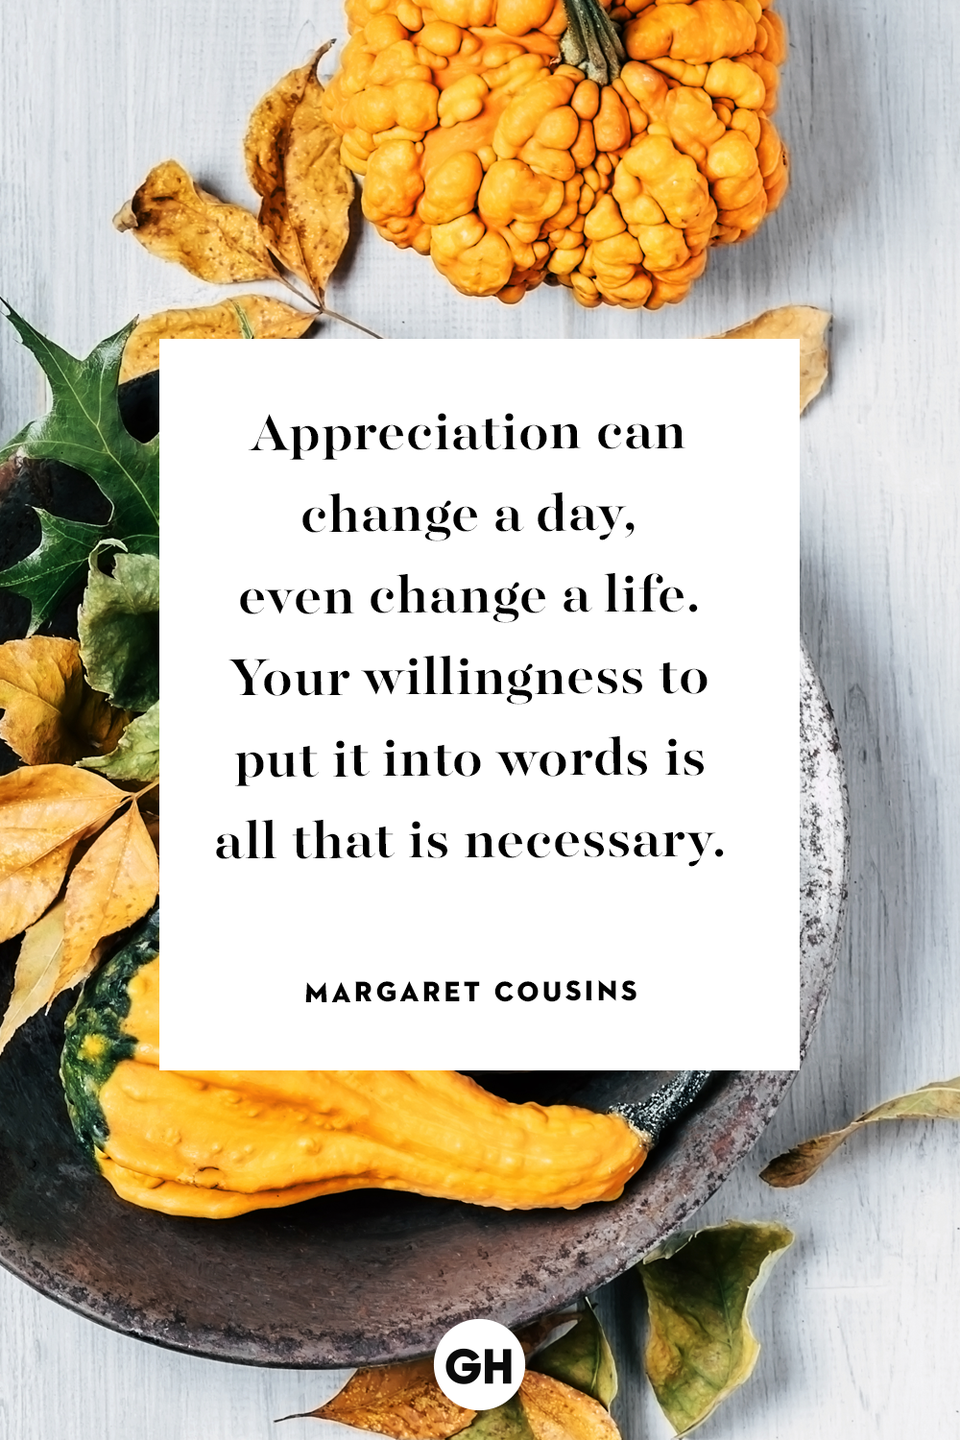 <p>Appreciation can change a day, even change a life. Your willingness to put it into words is all that is necessary.</p>